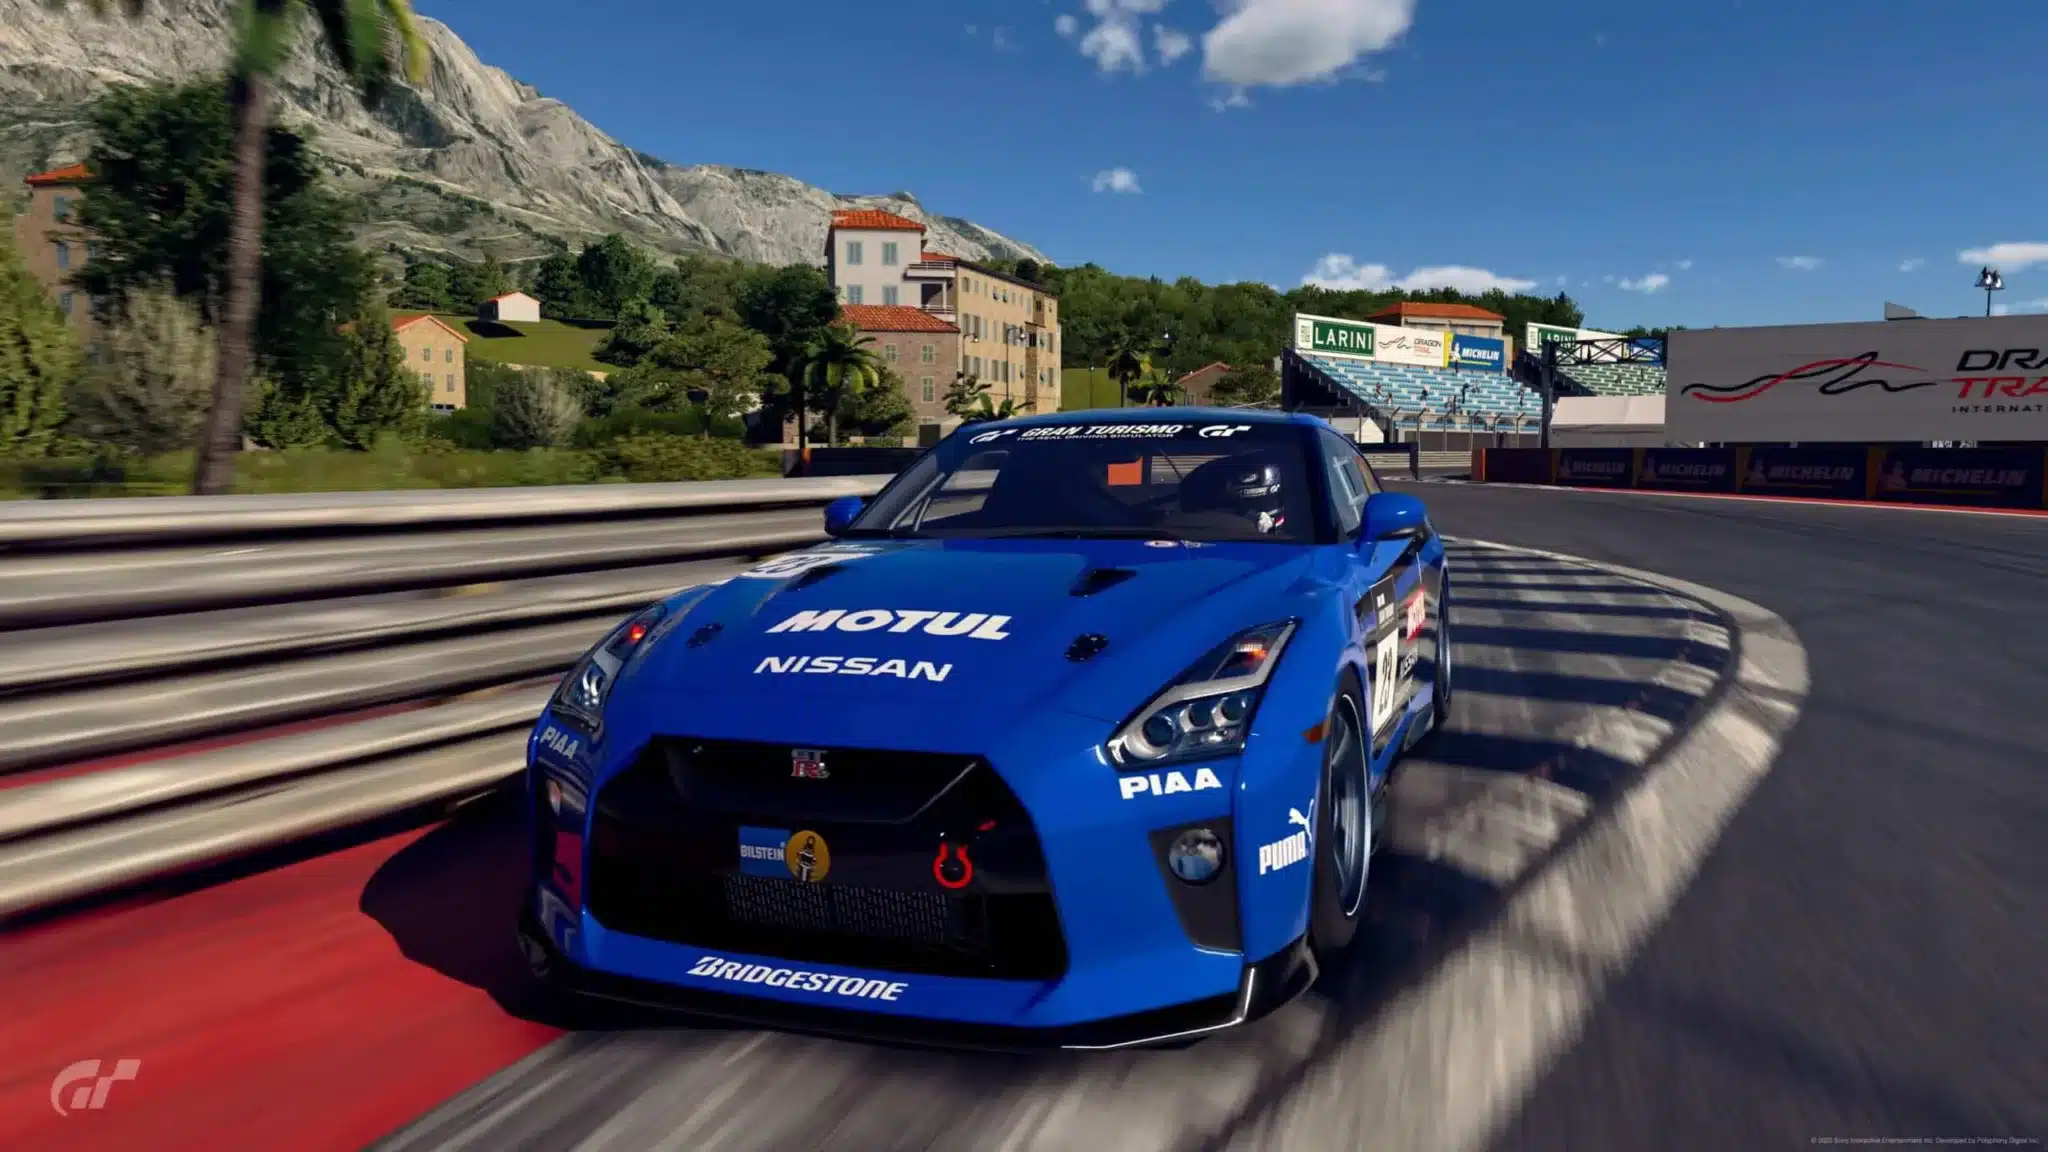 Gran Turismo 7 gets 35 minutes of gameplay and new details - Niche Gamer